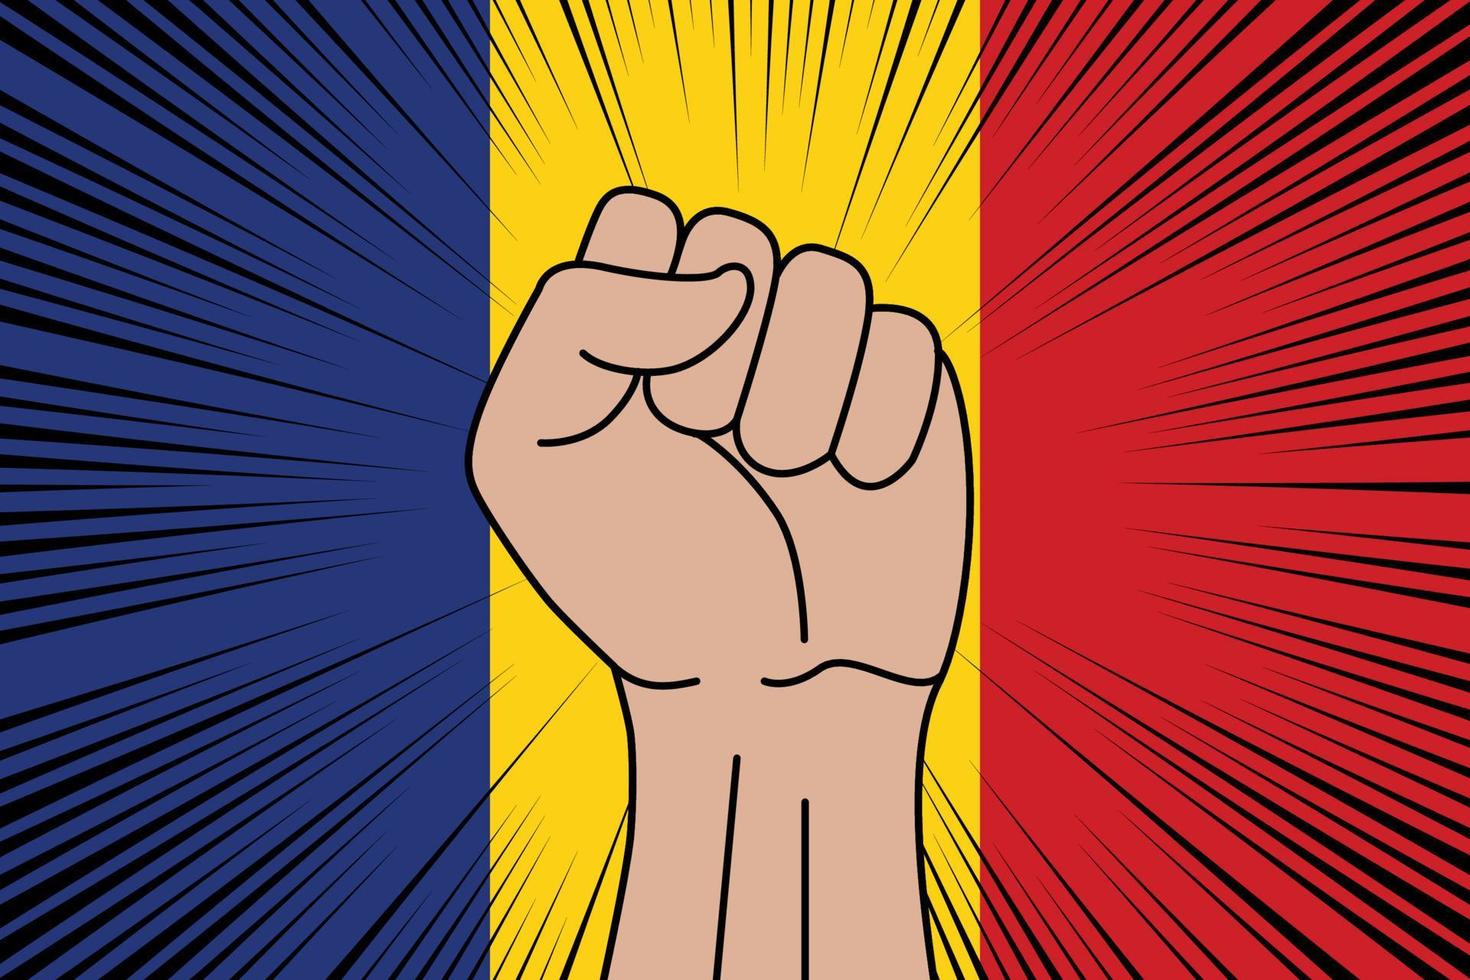 Human fist clenched symbol on flag of Romania vector